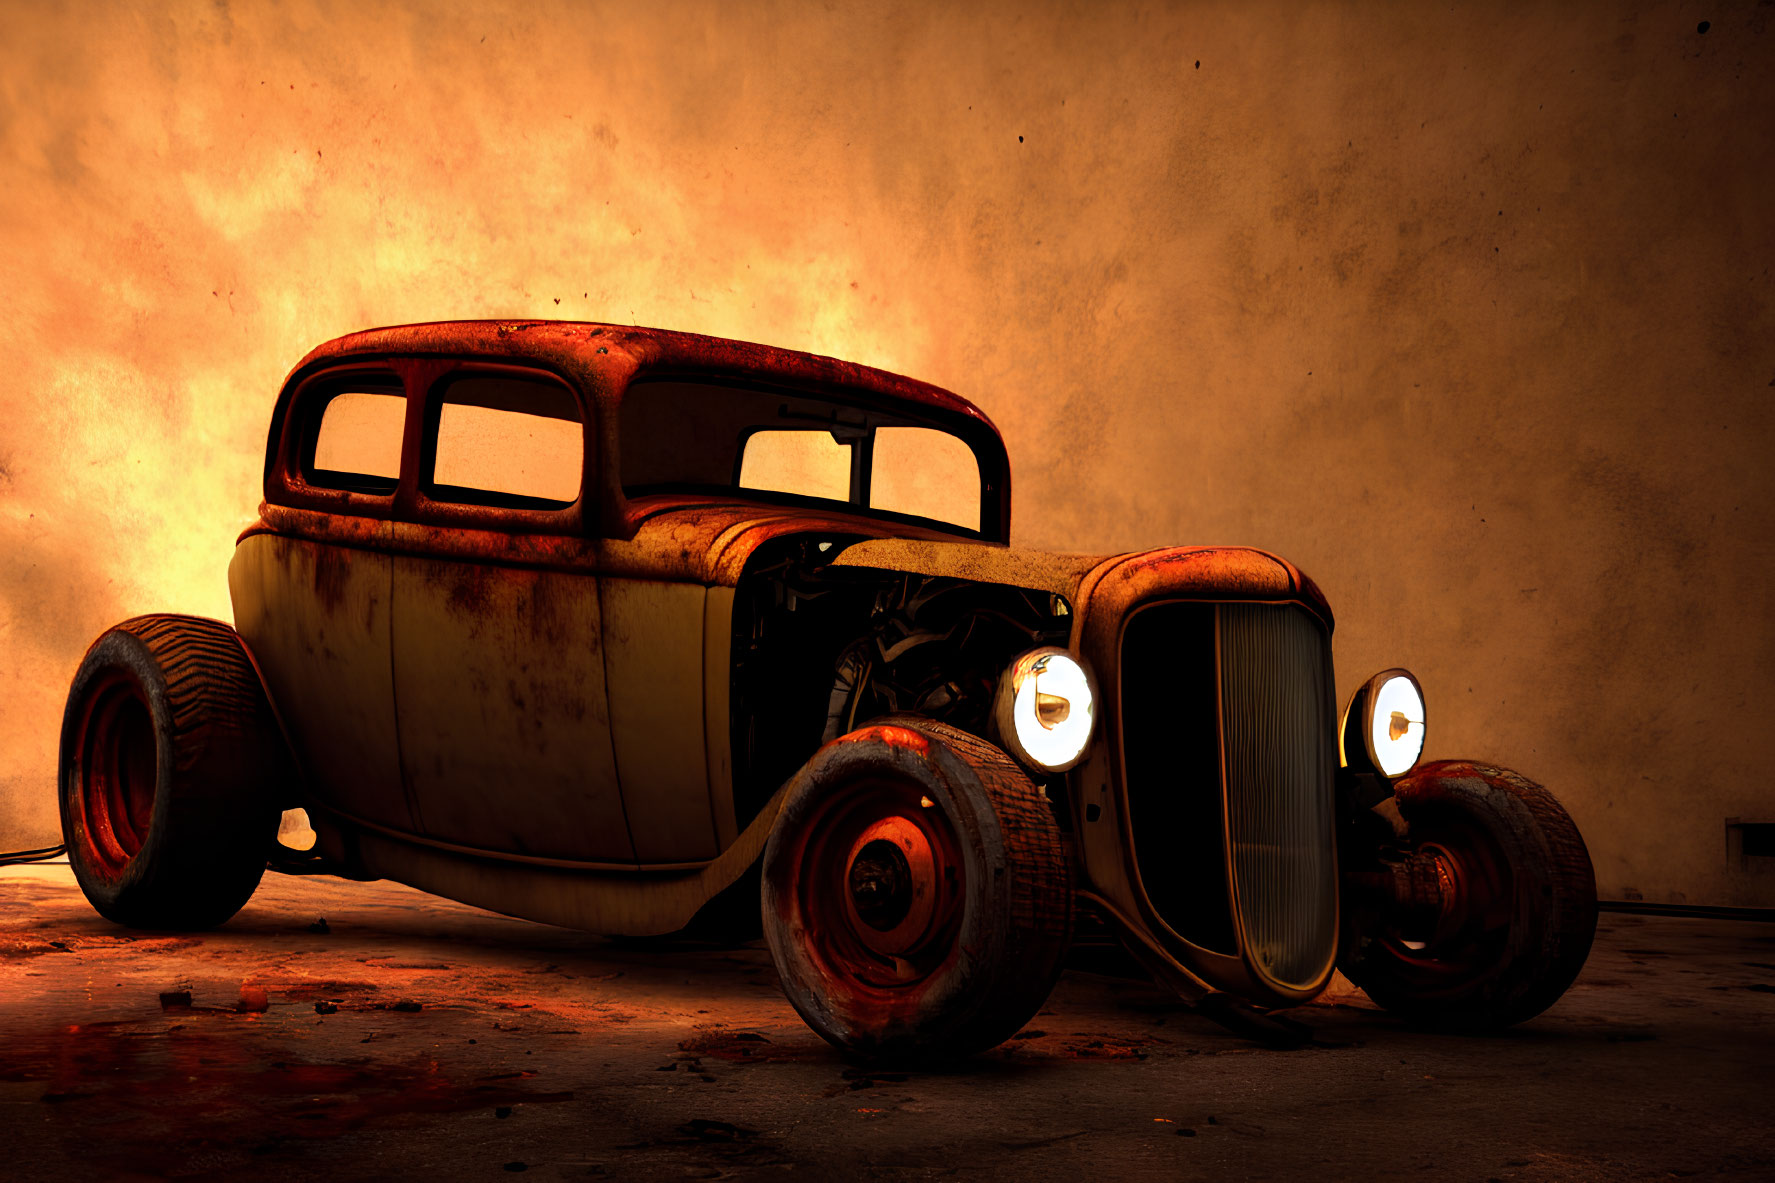 Vintage Car with Large Headlights in Rusty Setting Amid Flames and Smoke-Filled Sky